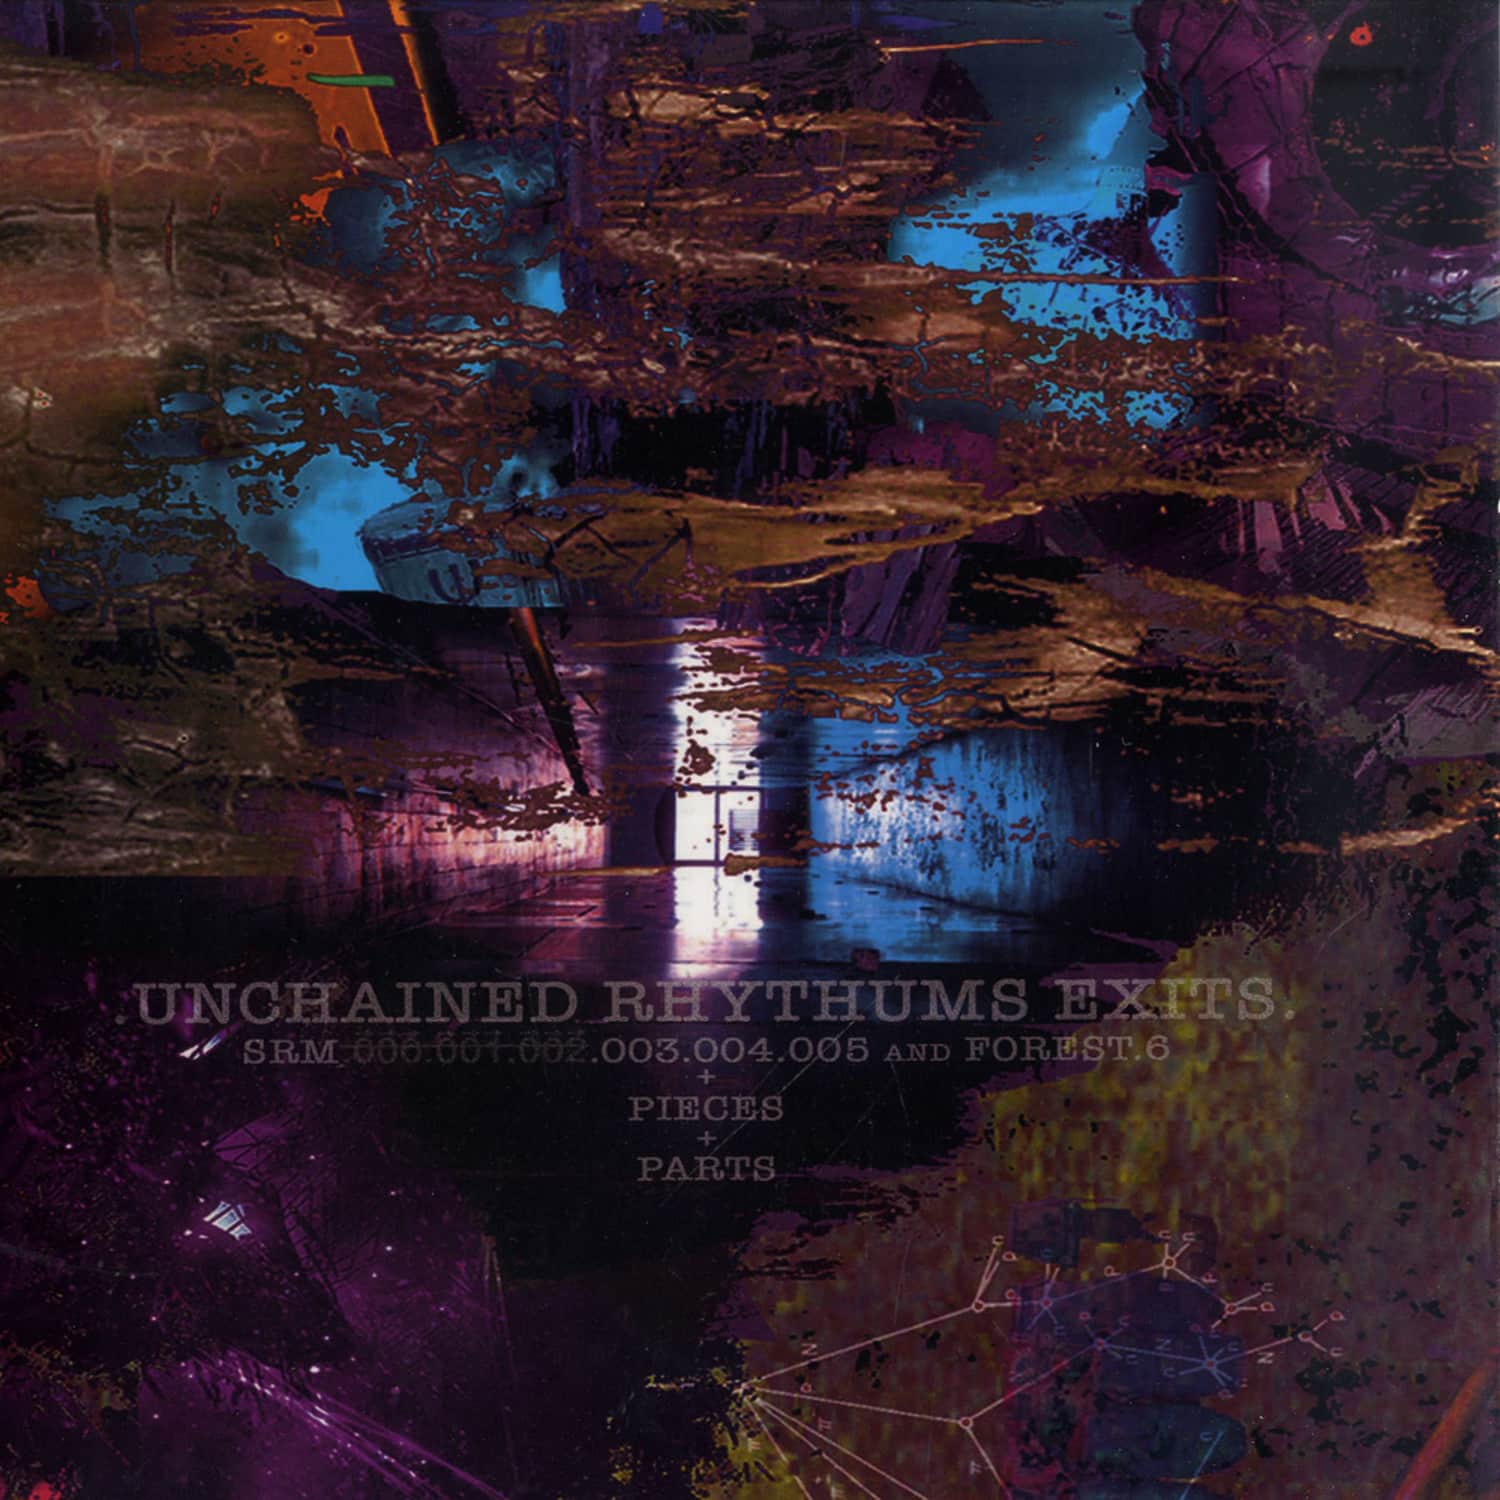 Joe Claussell - UNCHAINED RHYTHMS EXISTS 